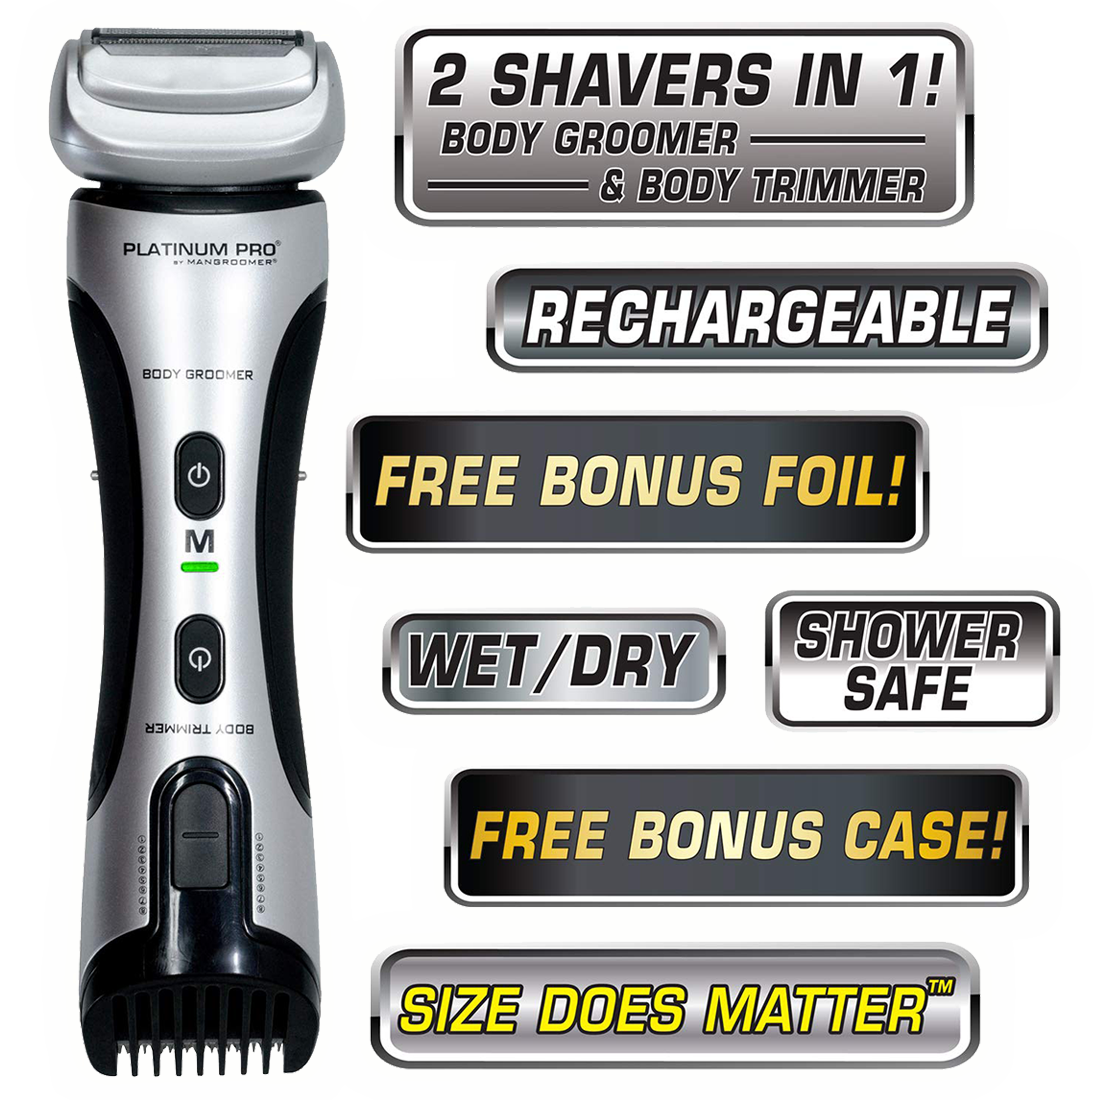 MANGROOMER PLATINUM PRO Body Groomer and Trimmer Specifications